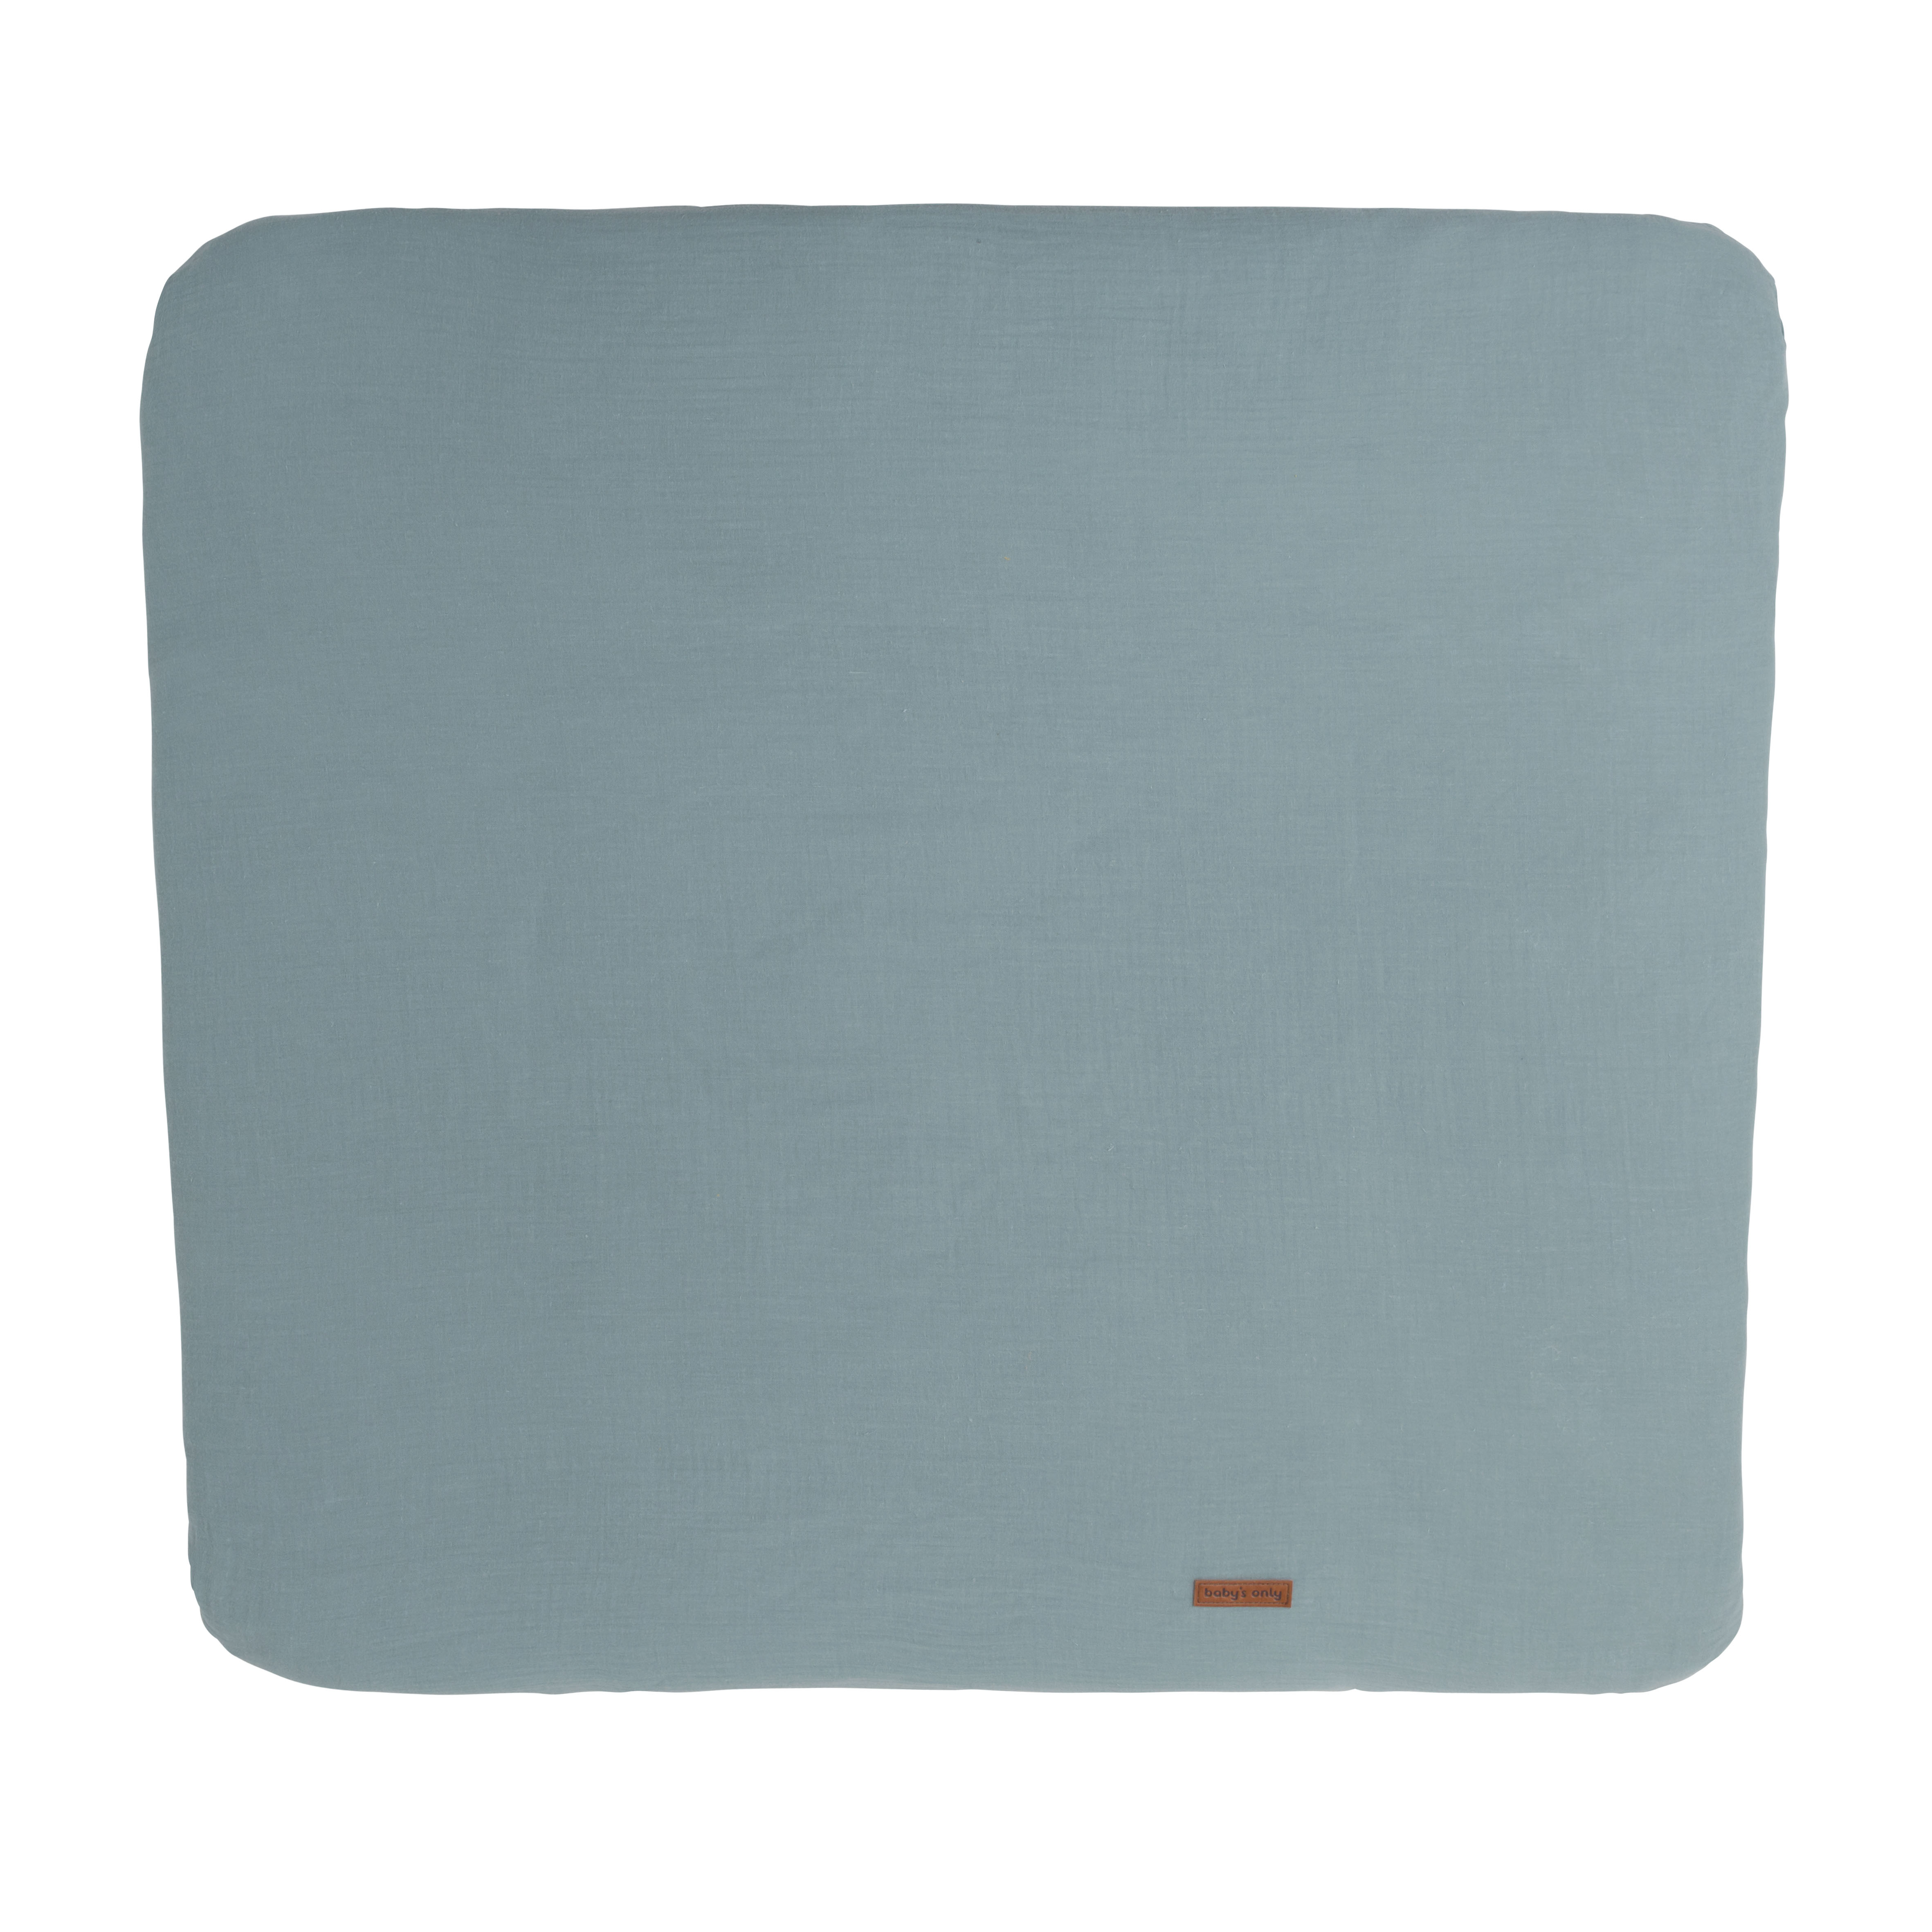 Changing pad cover Breeze stonegreen - 75x85